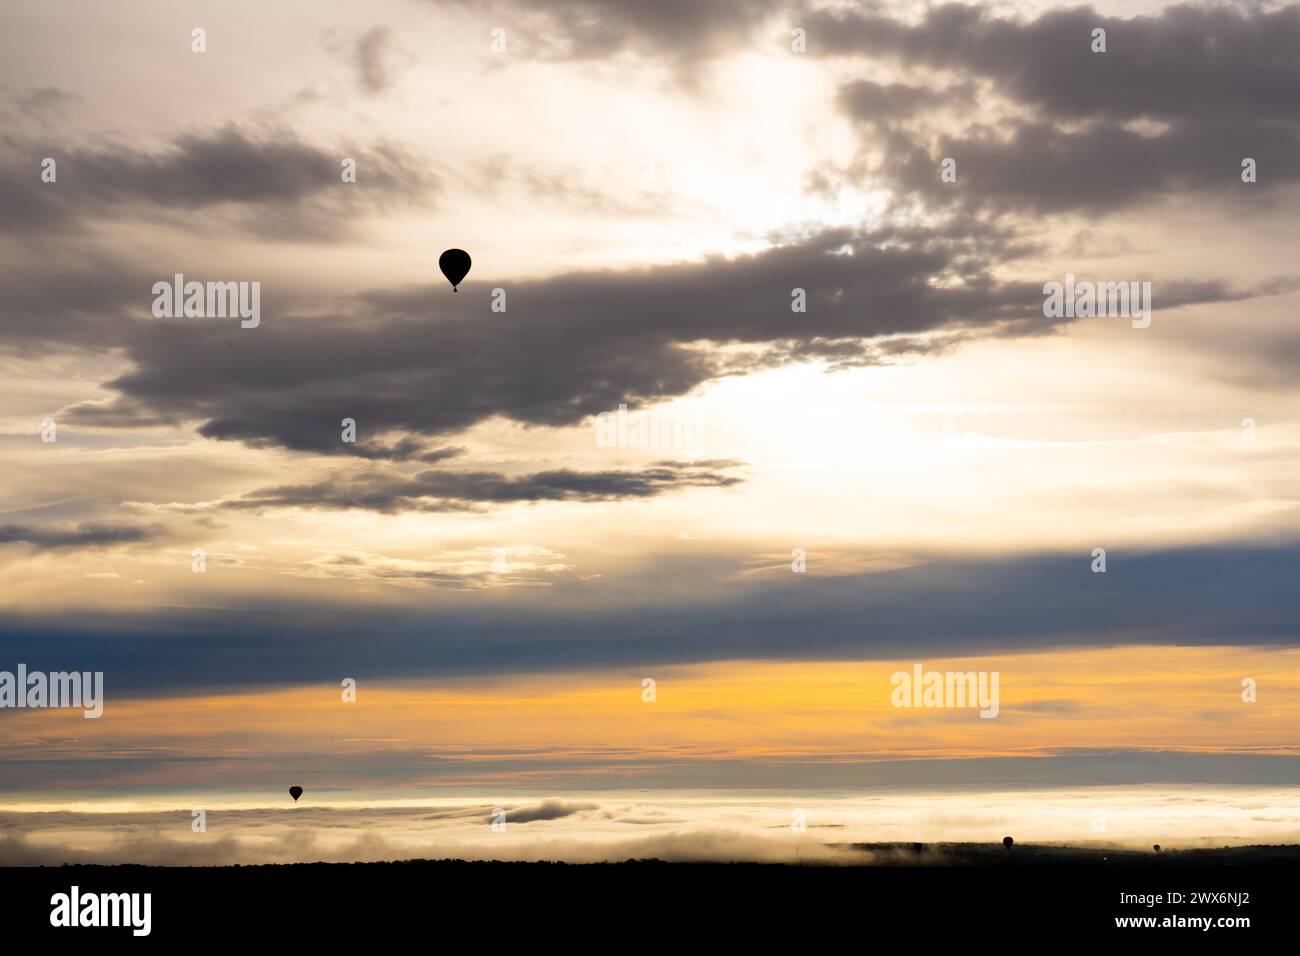 Hot air balloon flying at dawn over a blanket of clouds Stock Photo